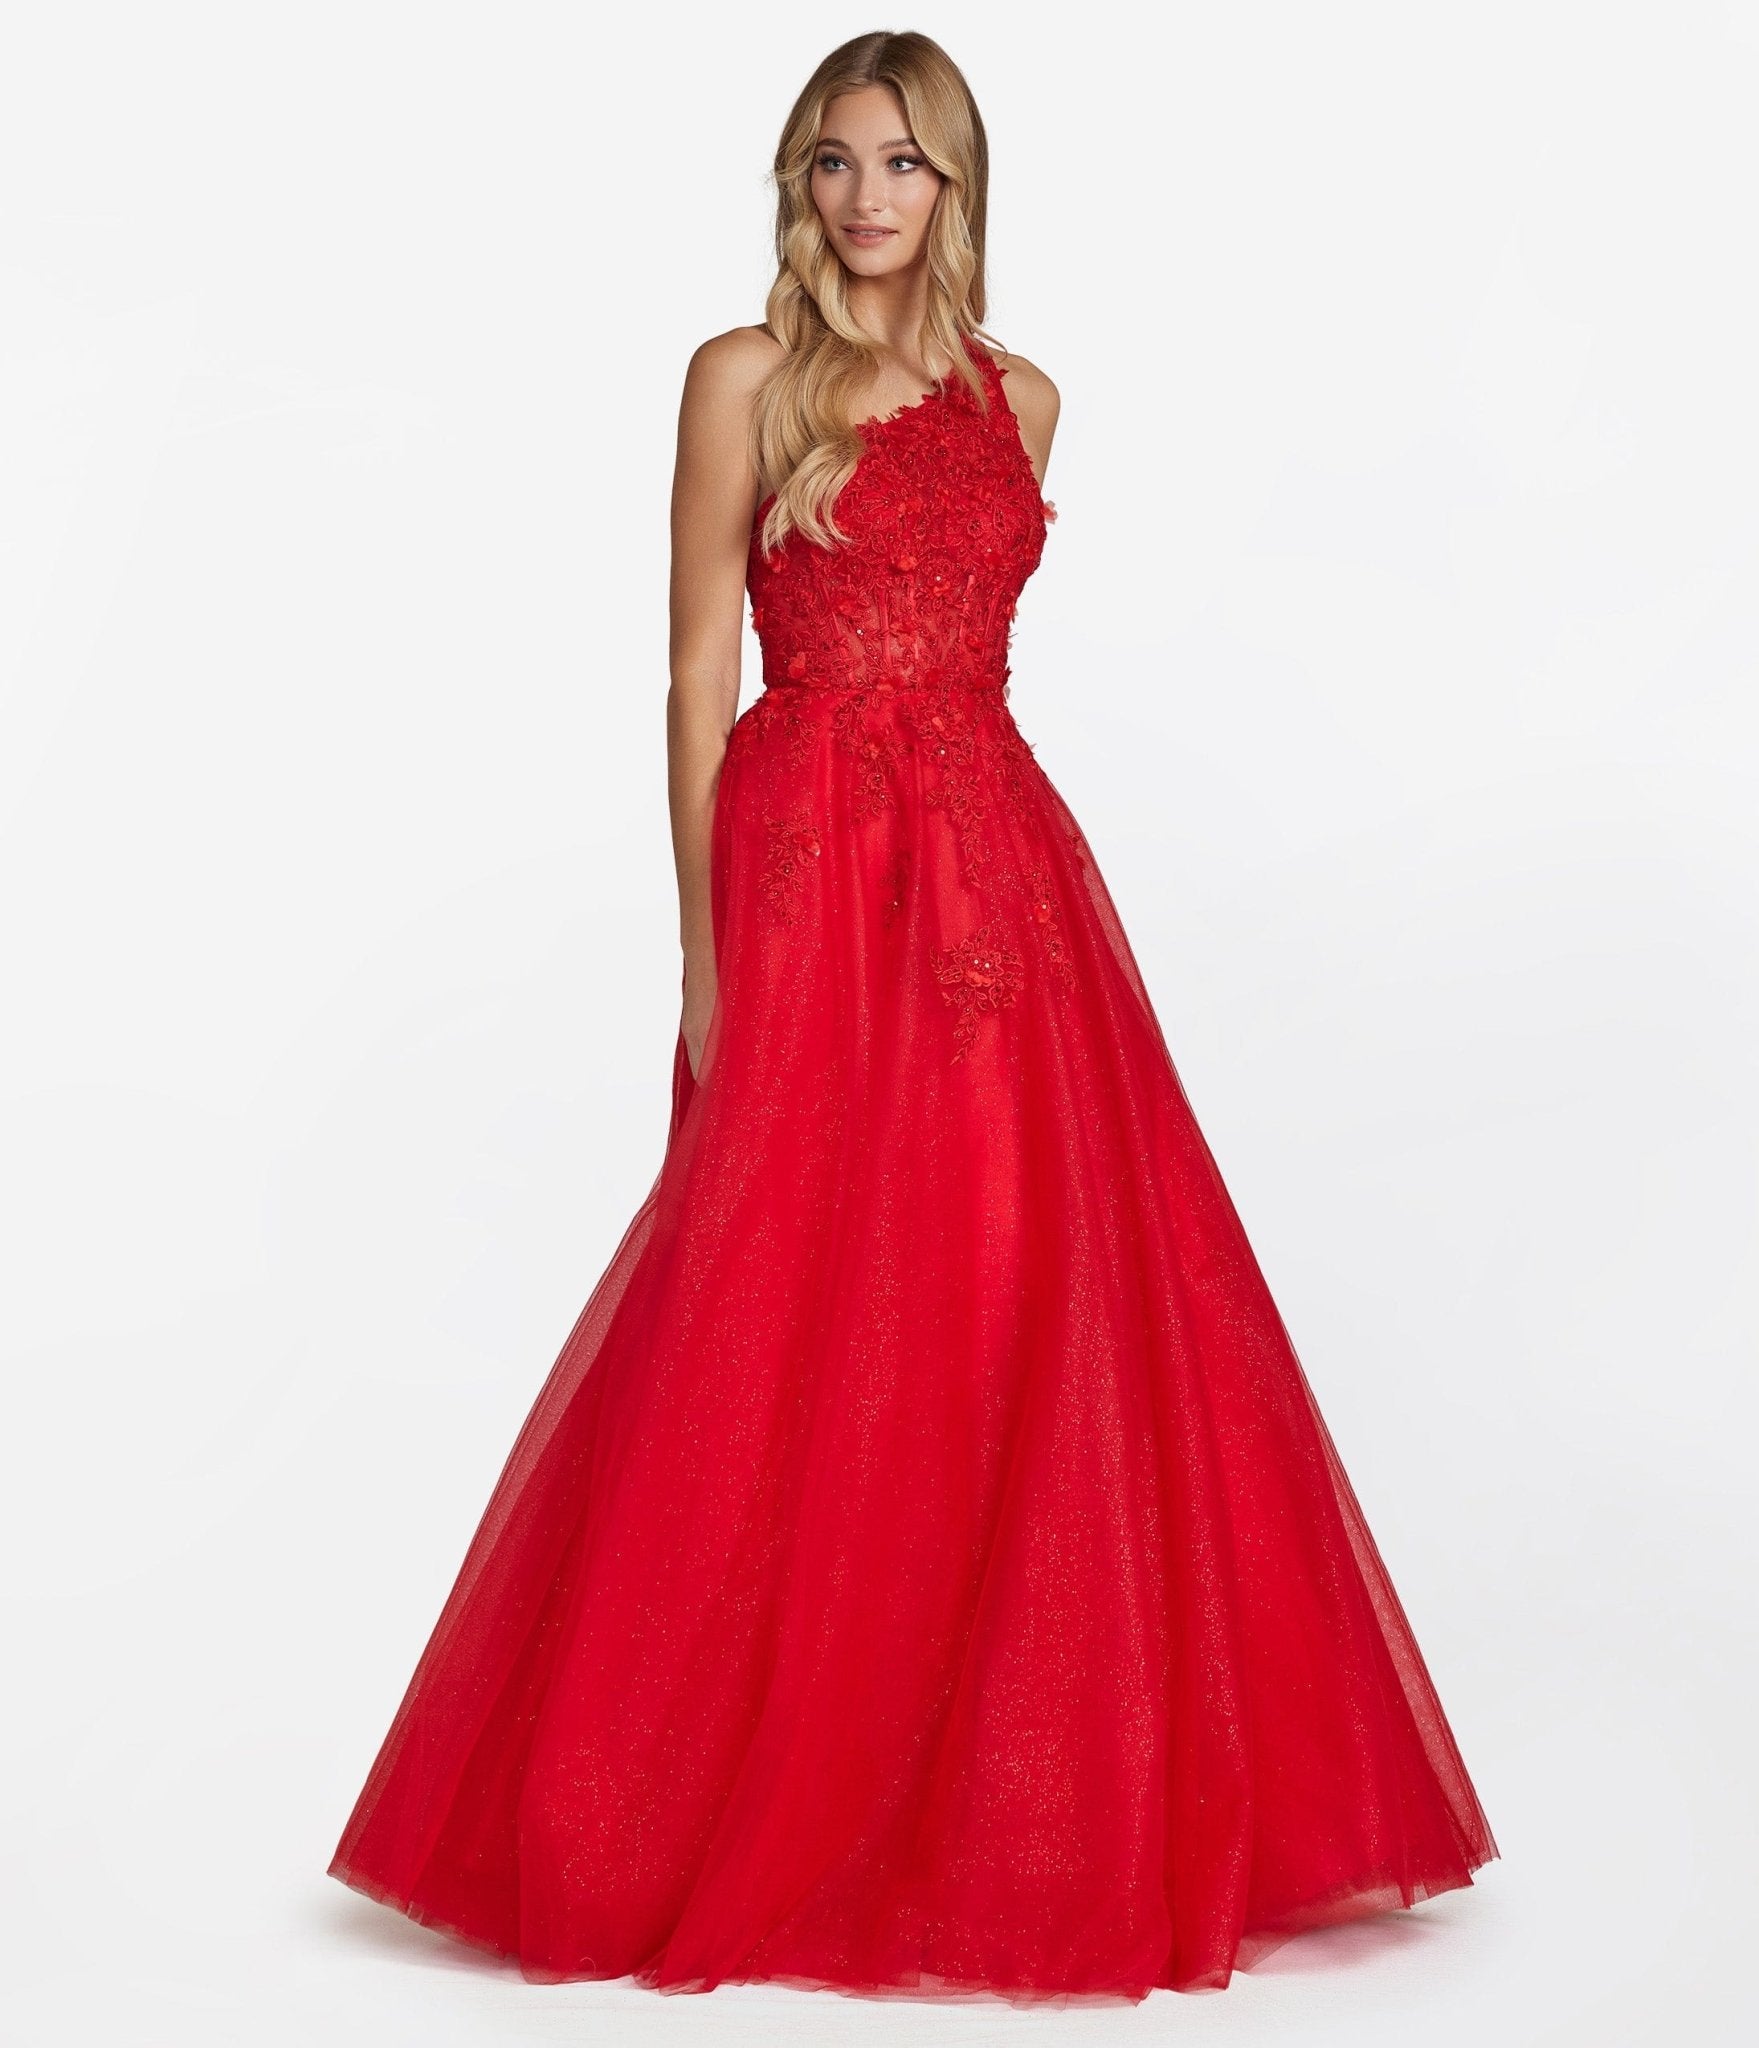 

Red Floral Coset & Glitter Tulle Prom Ball Gown